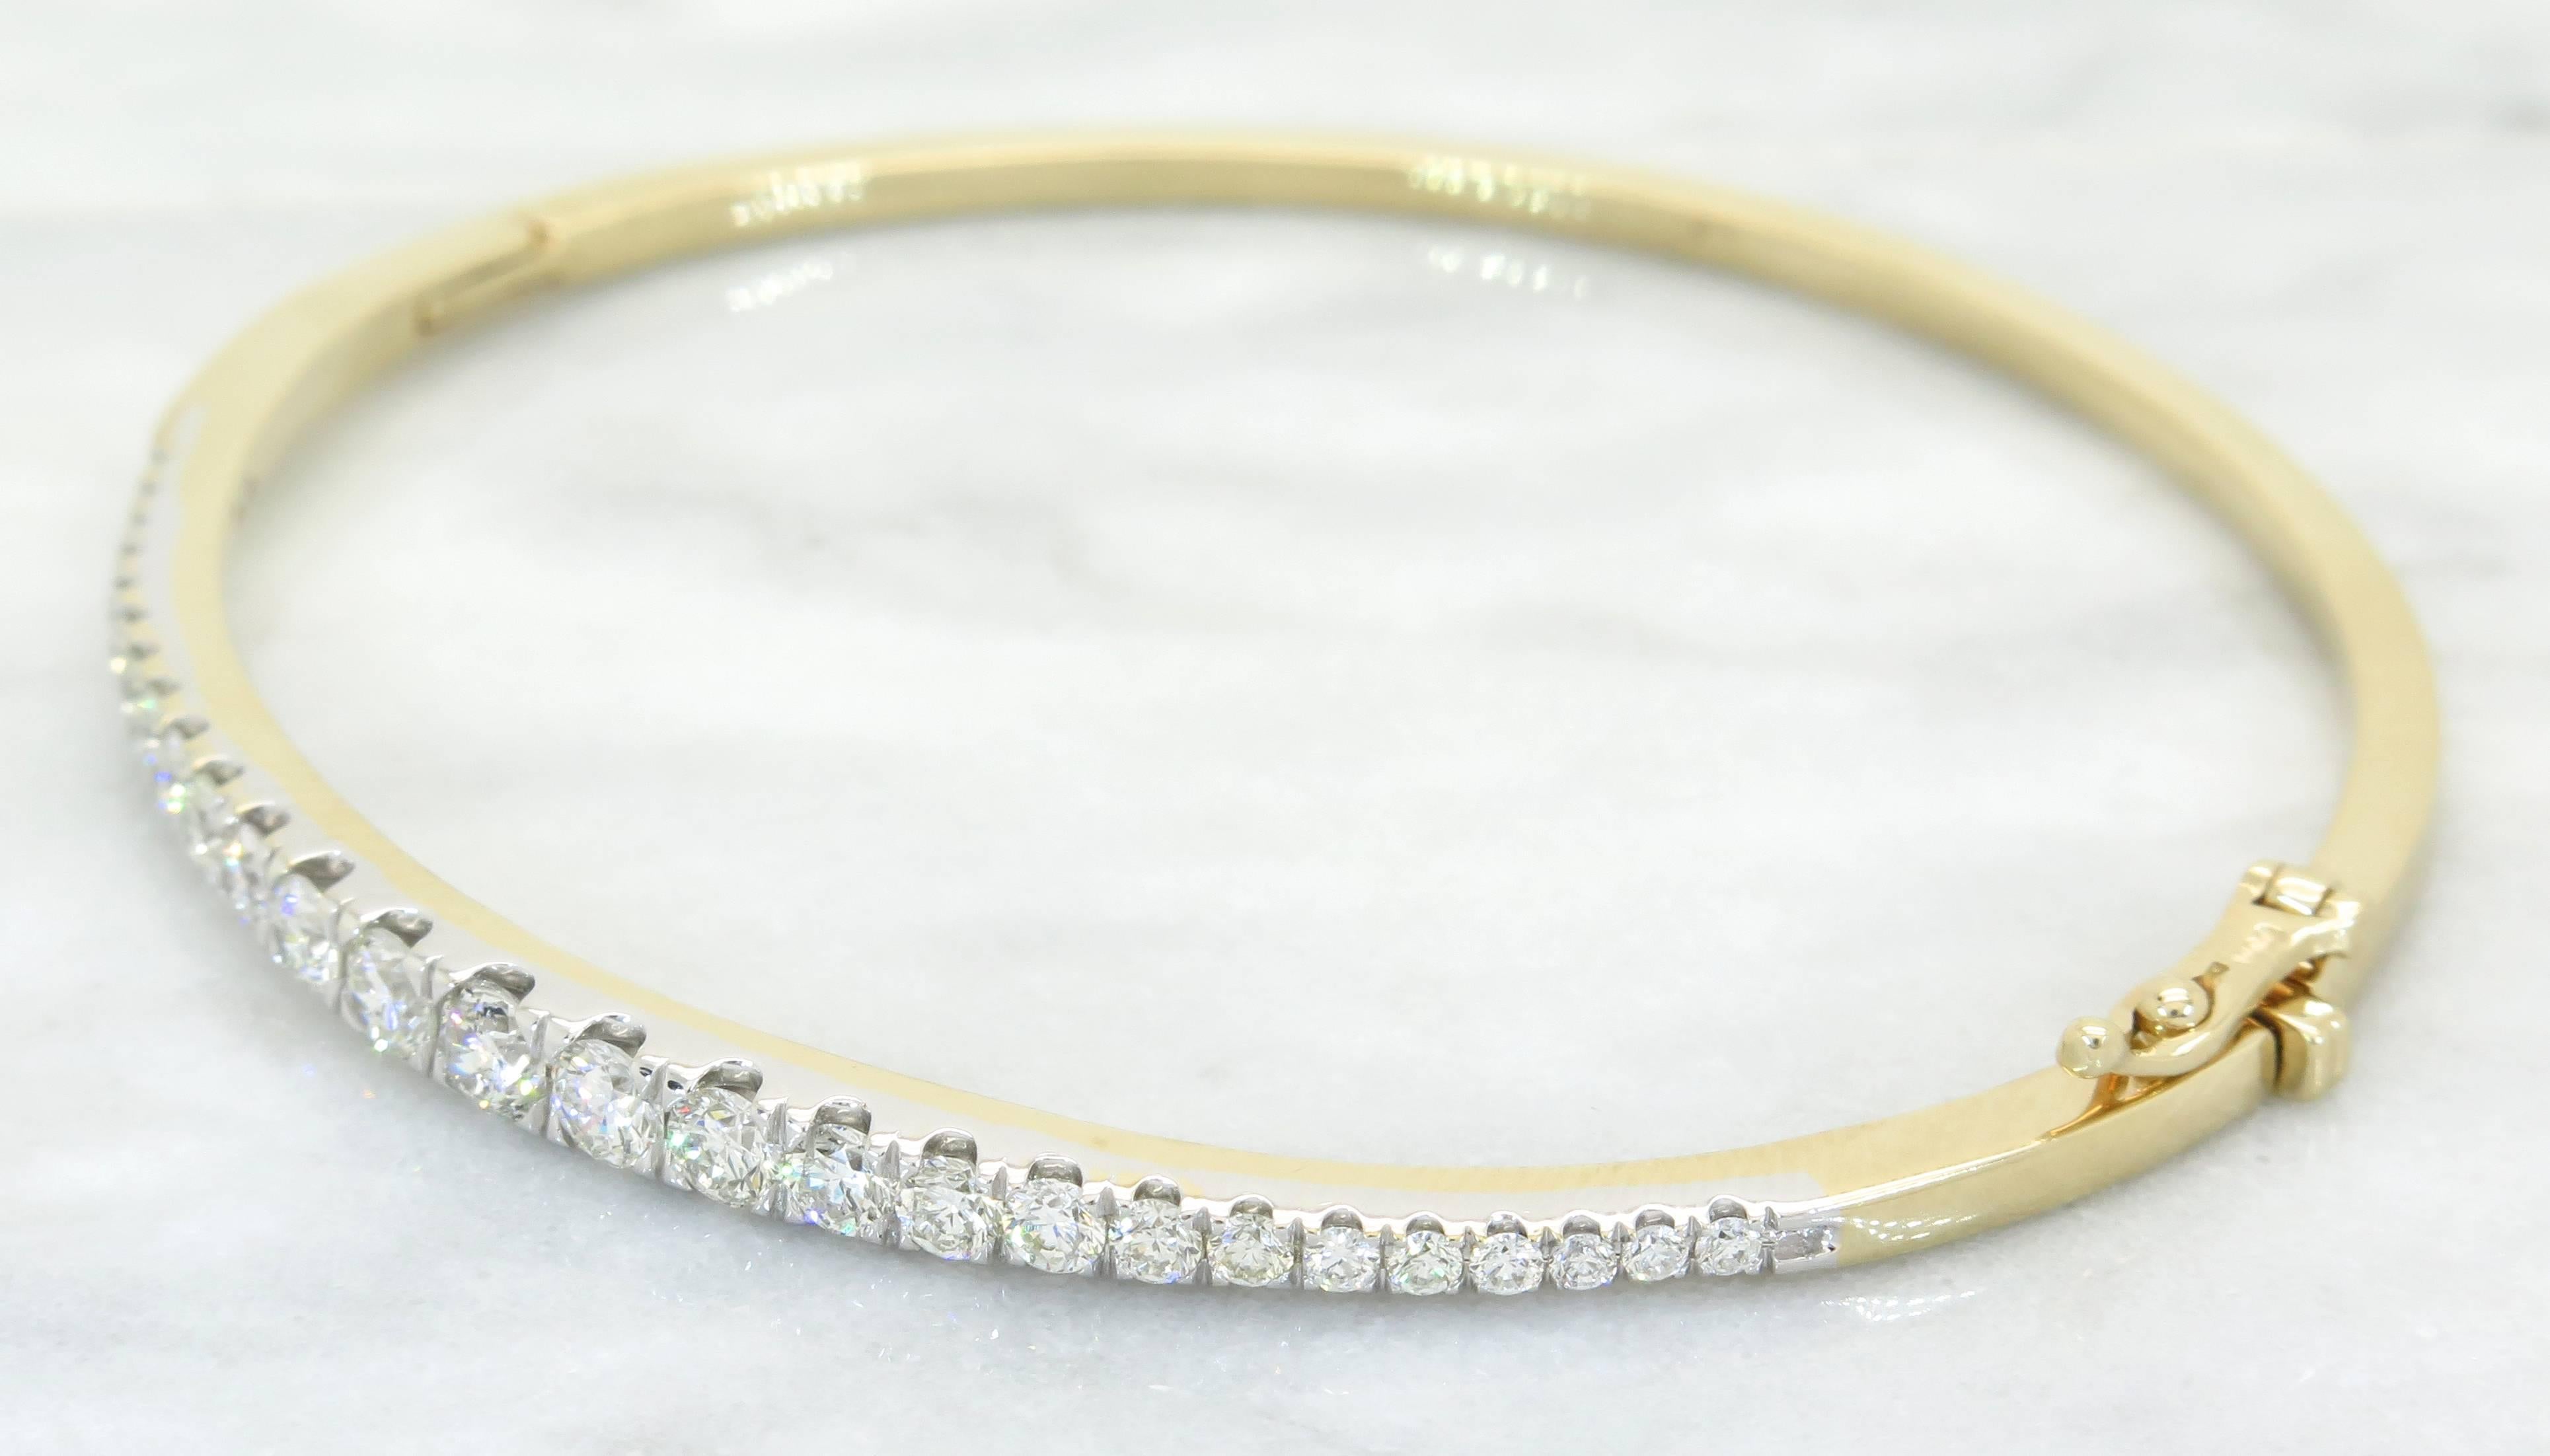 This beautiful bangle bracelet features 27 Round Brilliant Cut Diamonds. The diamonds have H-J color and I-SI clarity. The total diamond weight is approximately 1.17CTW. The 14K yellow & white gold bracelet is size 6.5